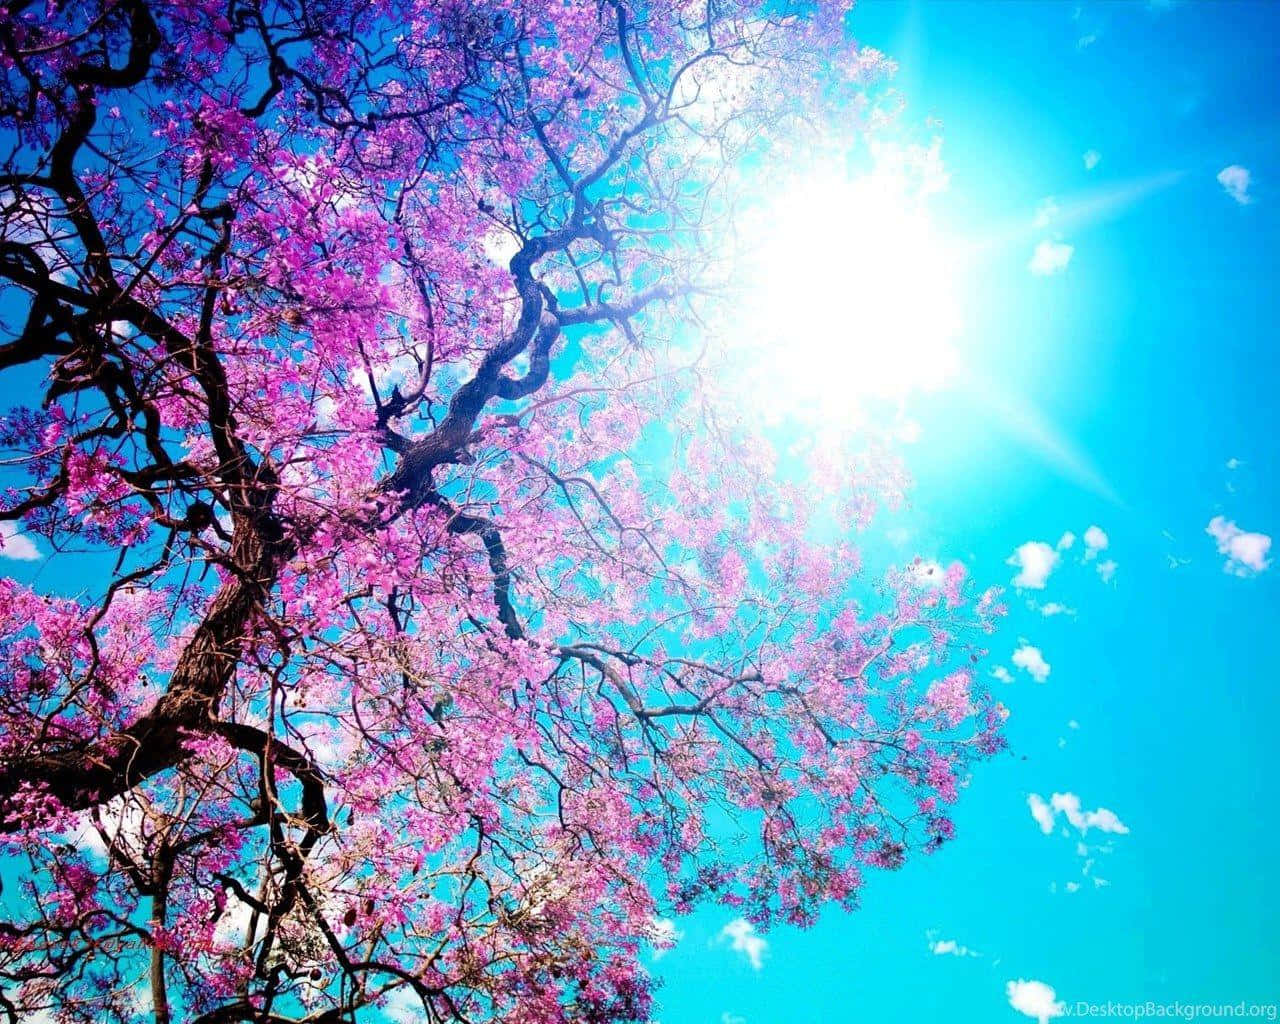 A Tree With Pink Flowers In The Sky